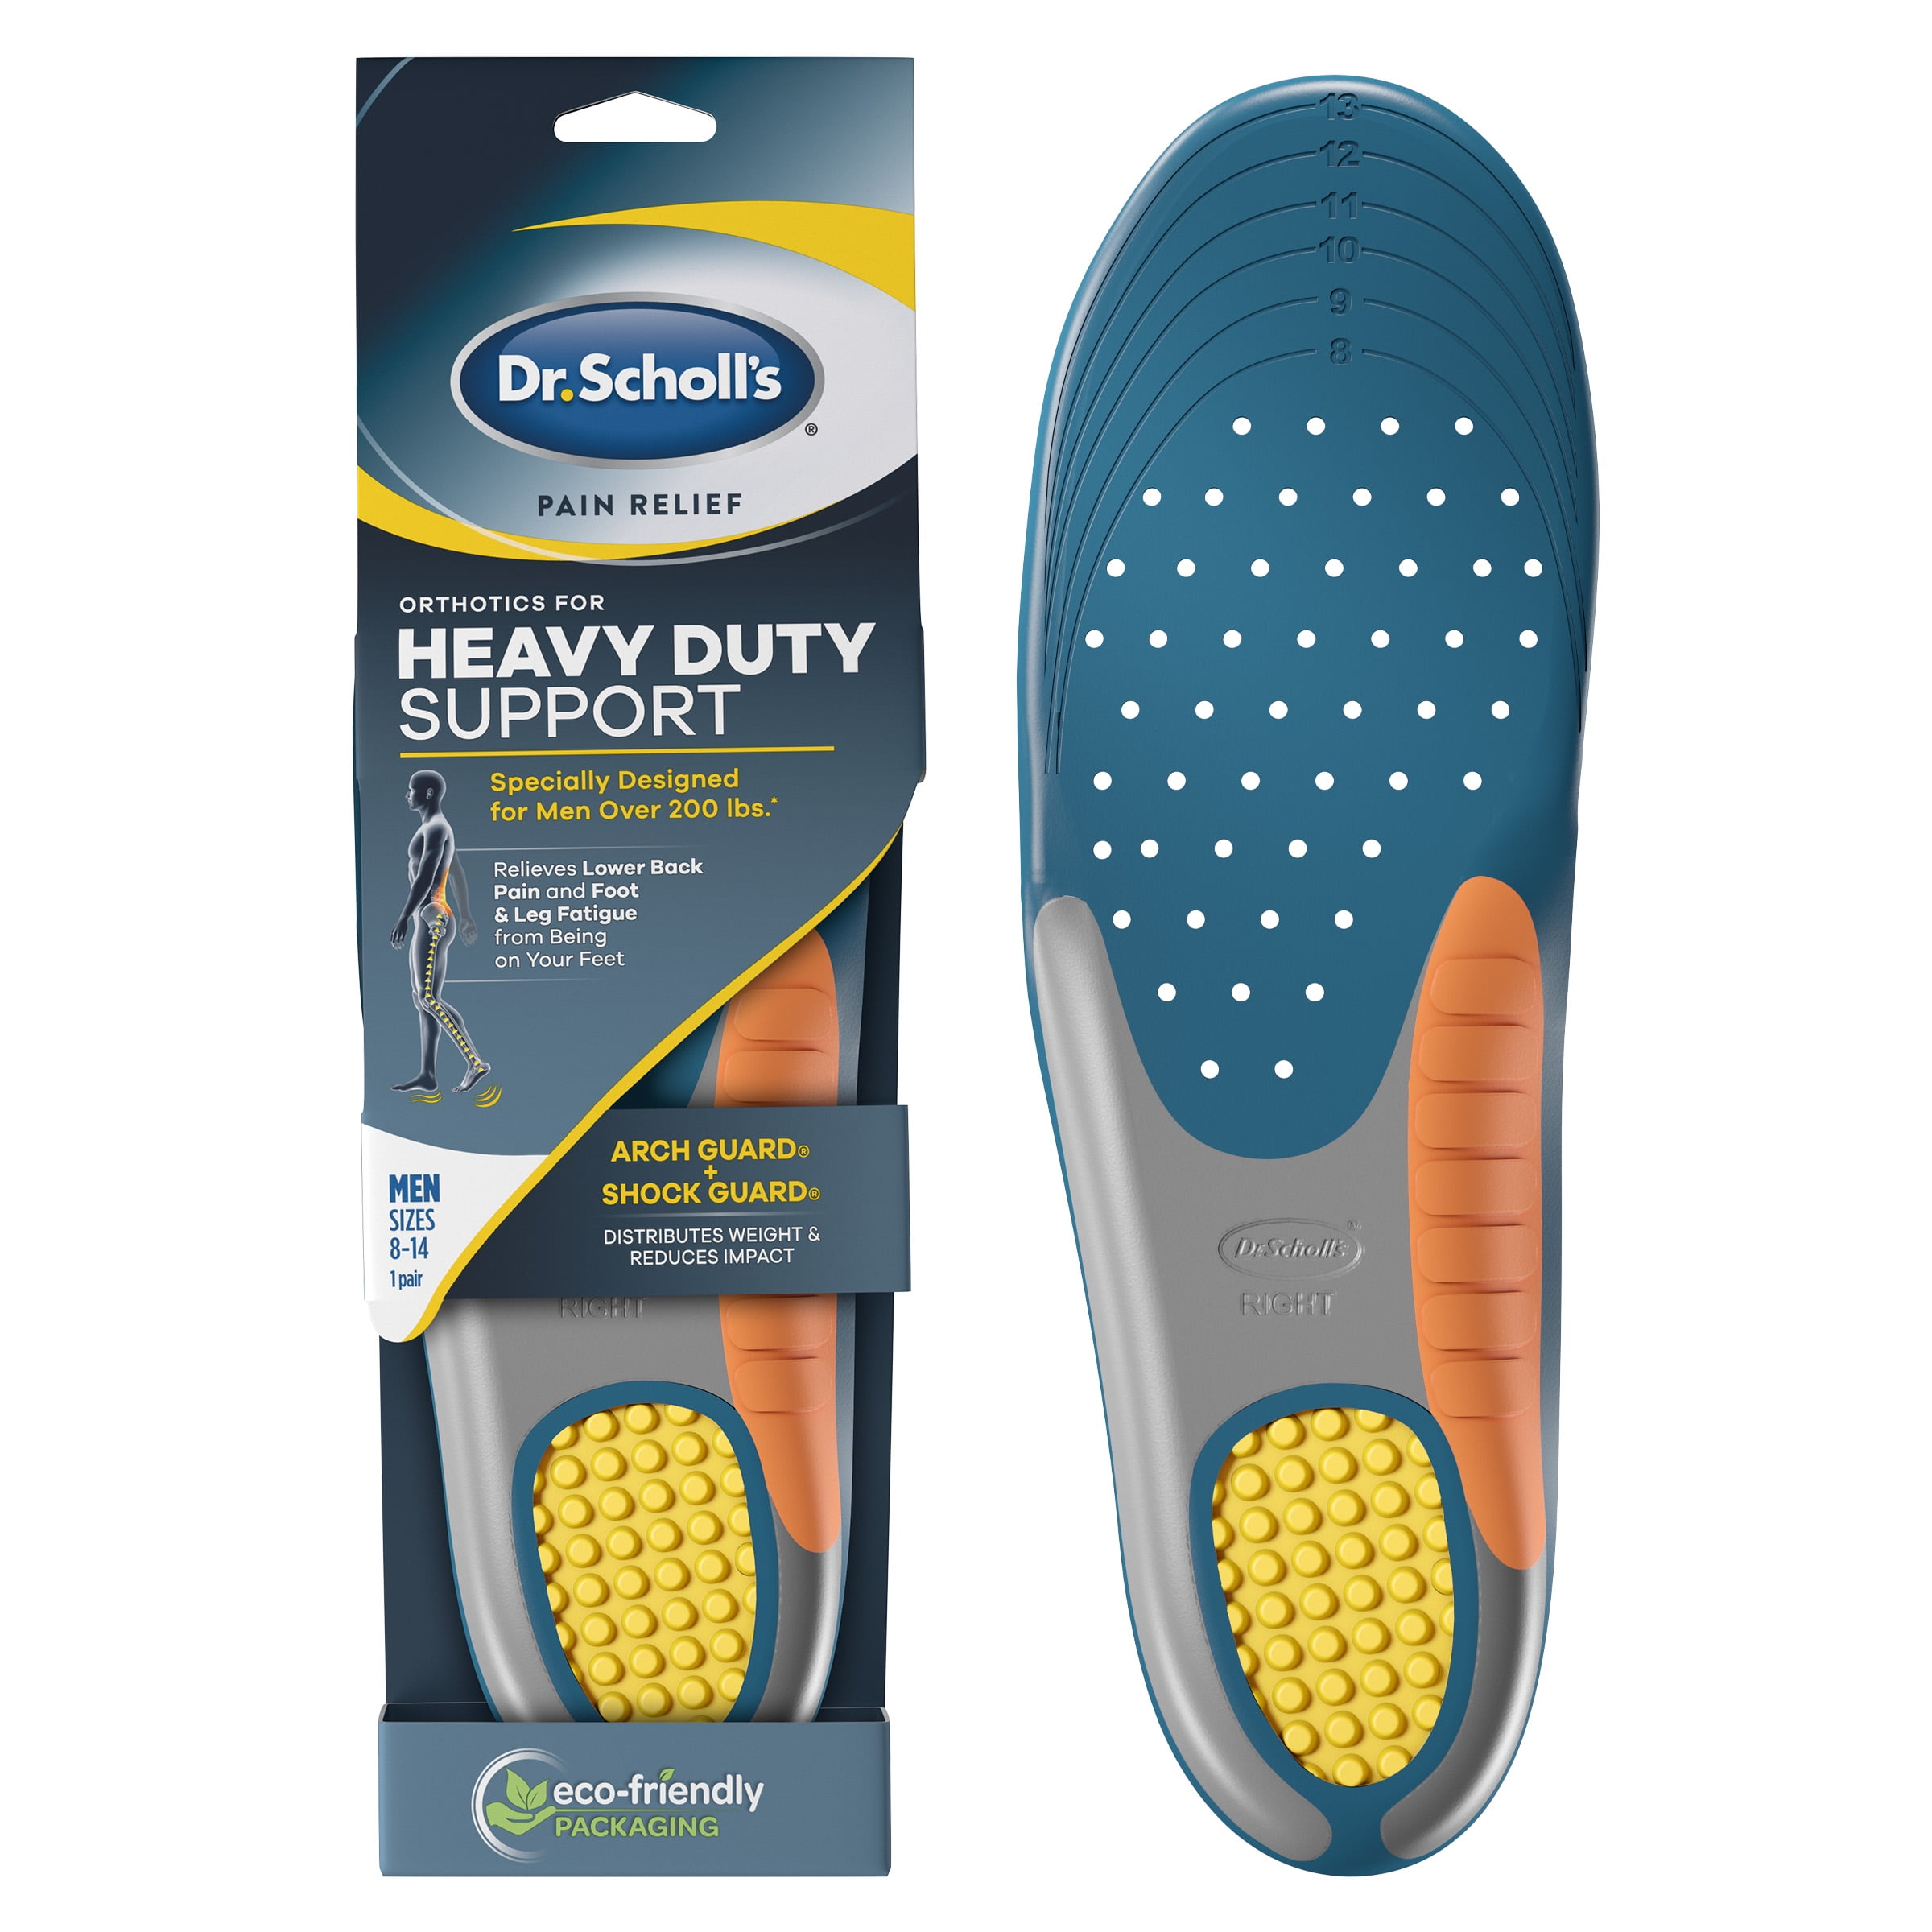 dr-scholl-s-heavy-duty-support-pain-relief-orthotic-inserts-for-men-8